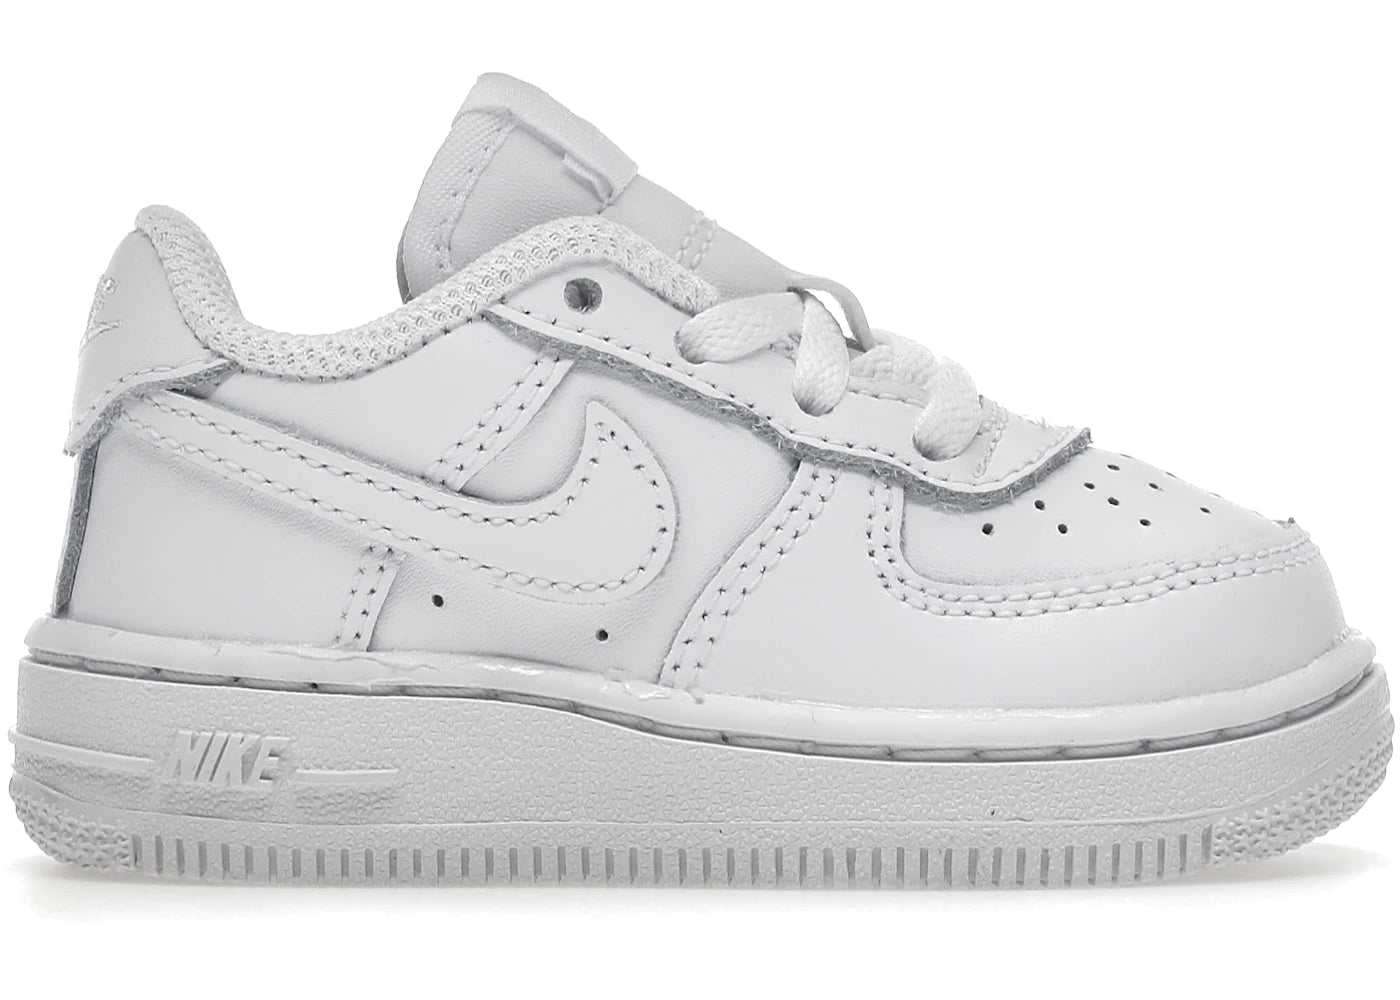 Nike Air Force 1 Low "White" TD